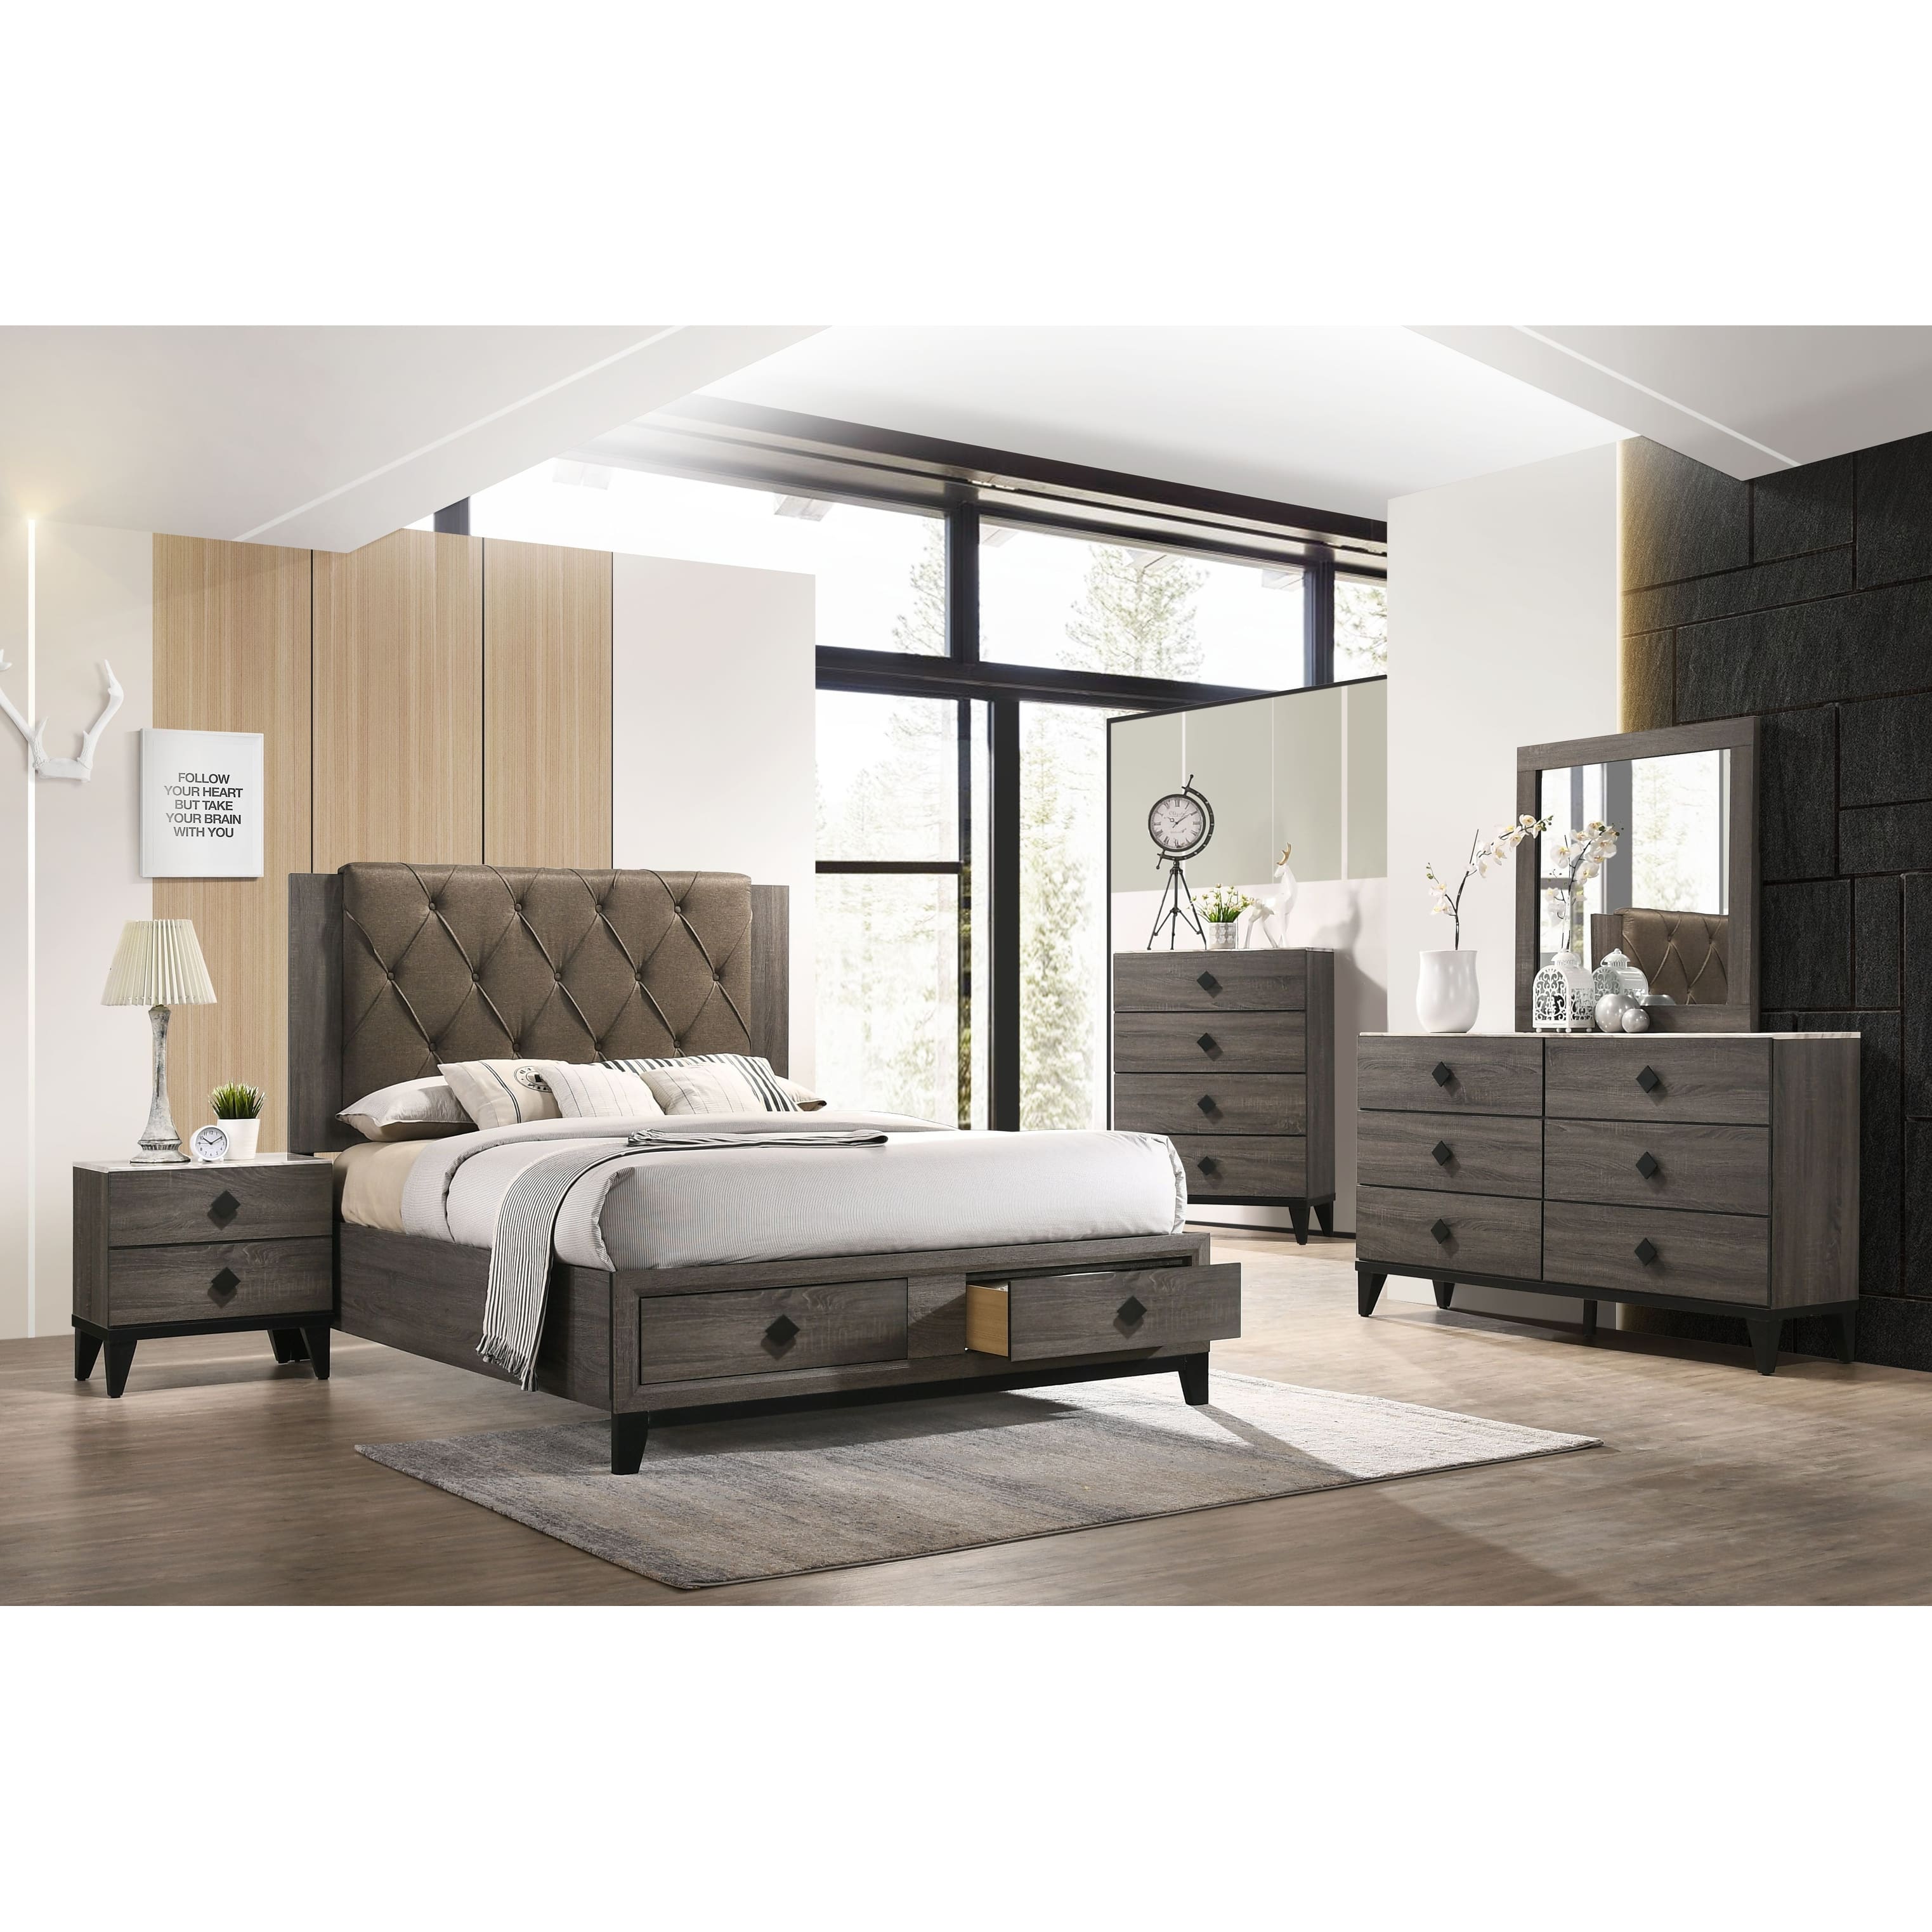 Avantika Eastern King Bed w/Storage, Fabric & Rustic Gray Oak, Tranditional Style, Storage Bed with 2 Drawers